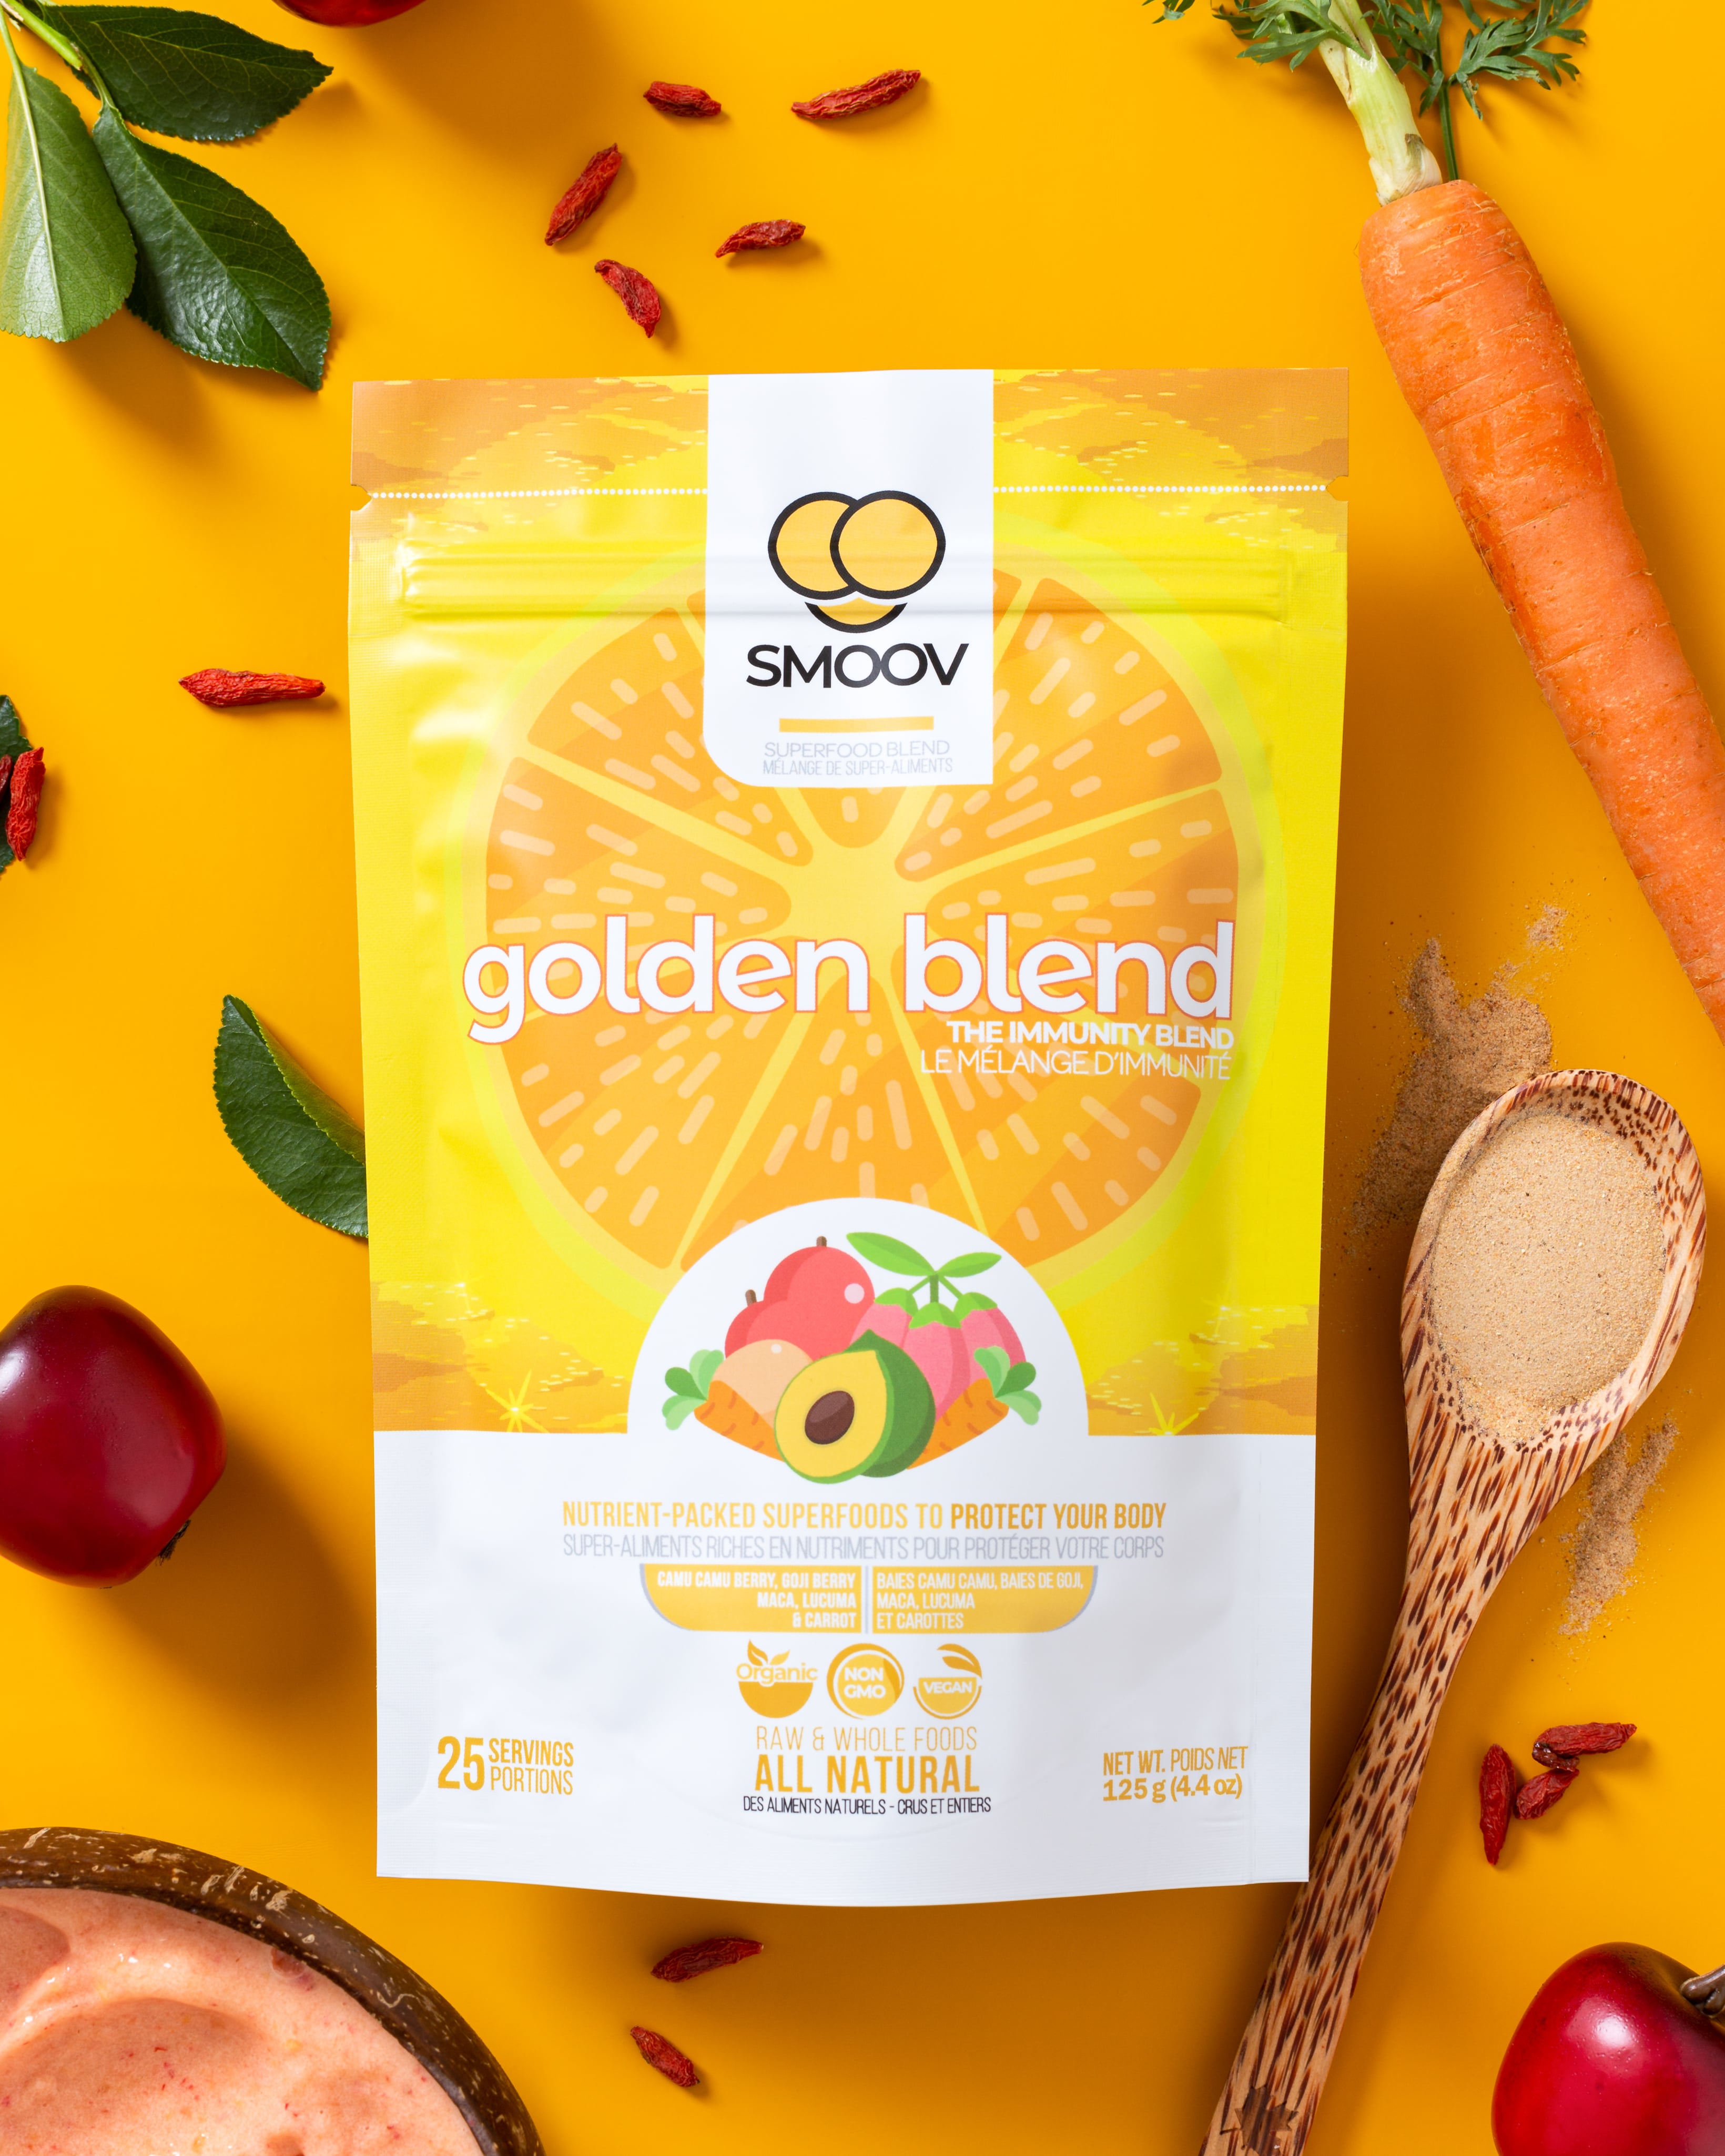 Easiest way to boost immunity and fight colds and flu's 5 superfoods to protect your body against infections Our golden blend includes adaptogens.